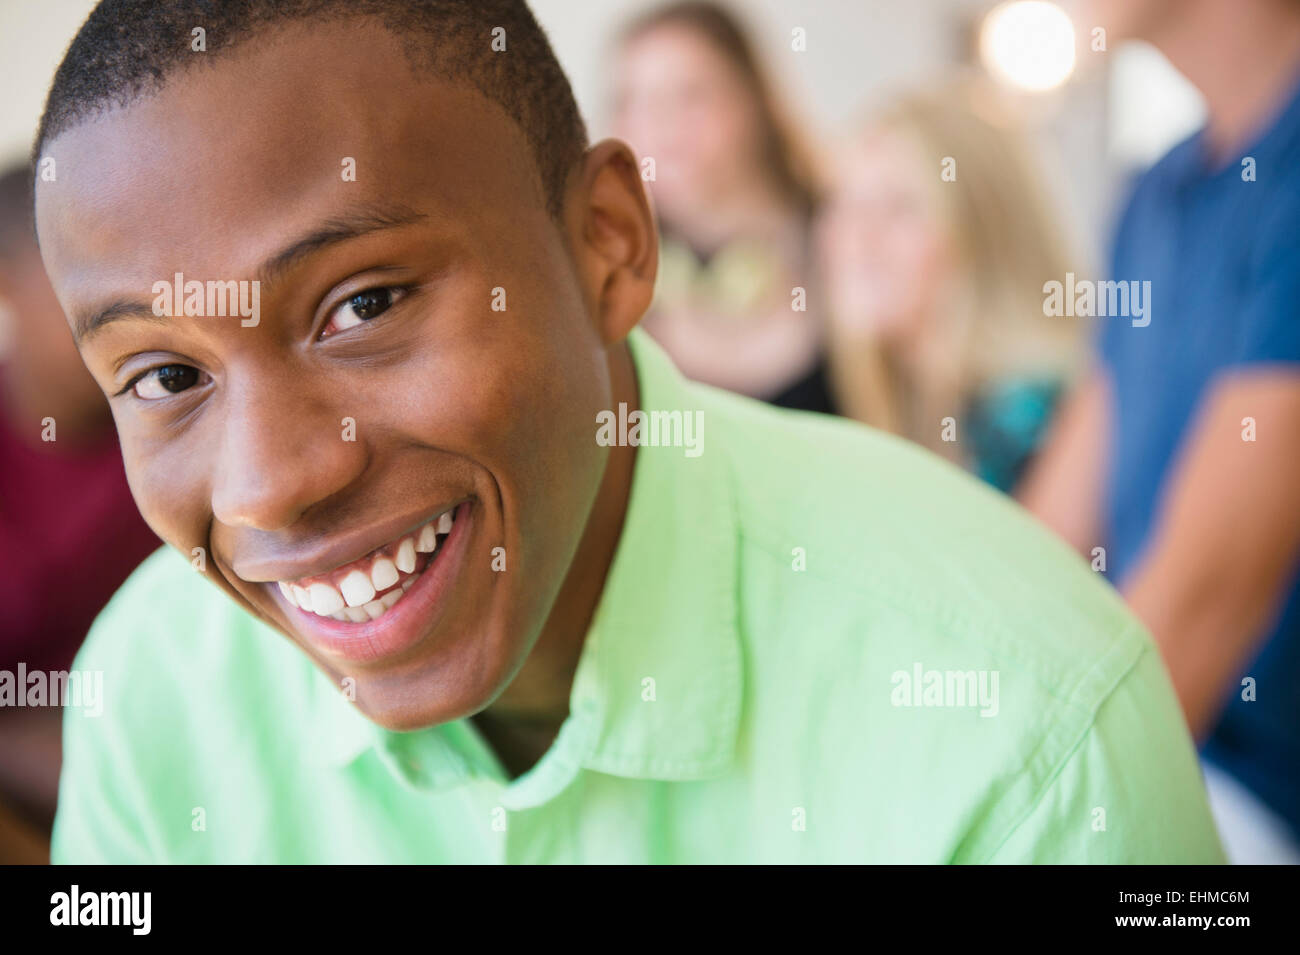 Close up of smiling face of teenage boy Stock Photo